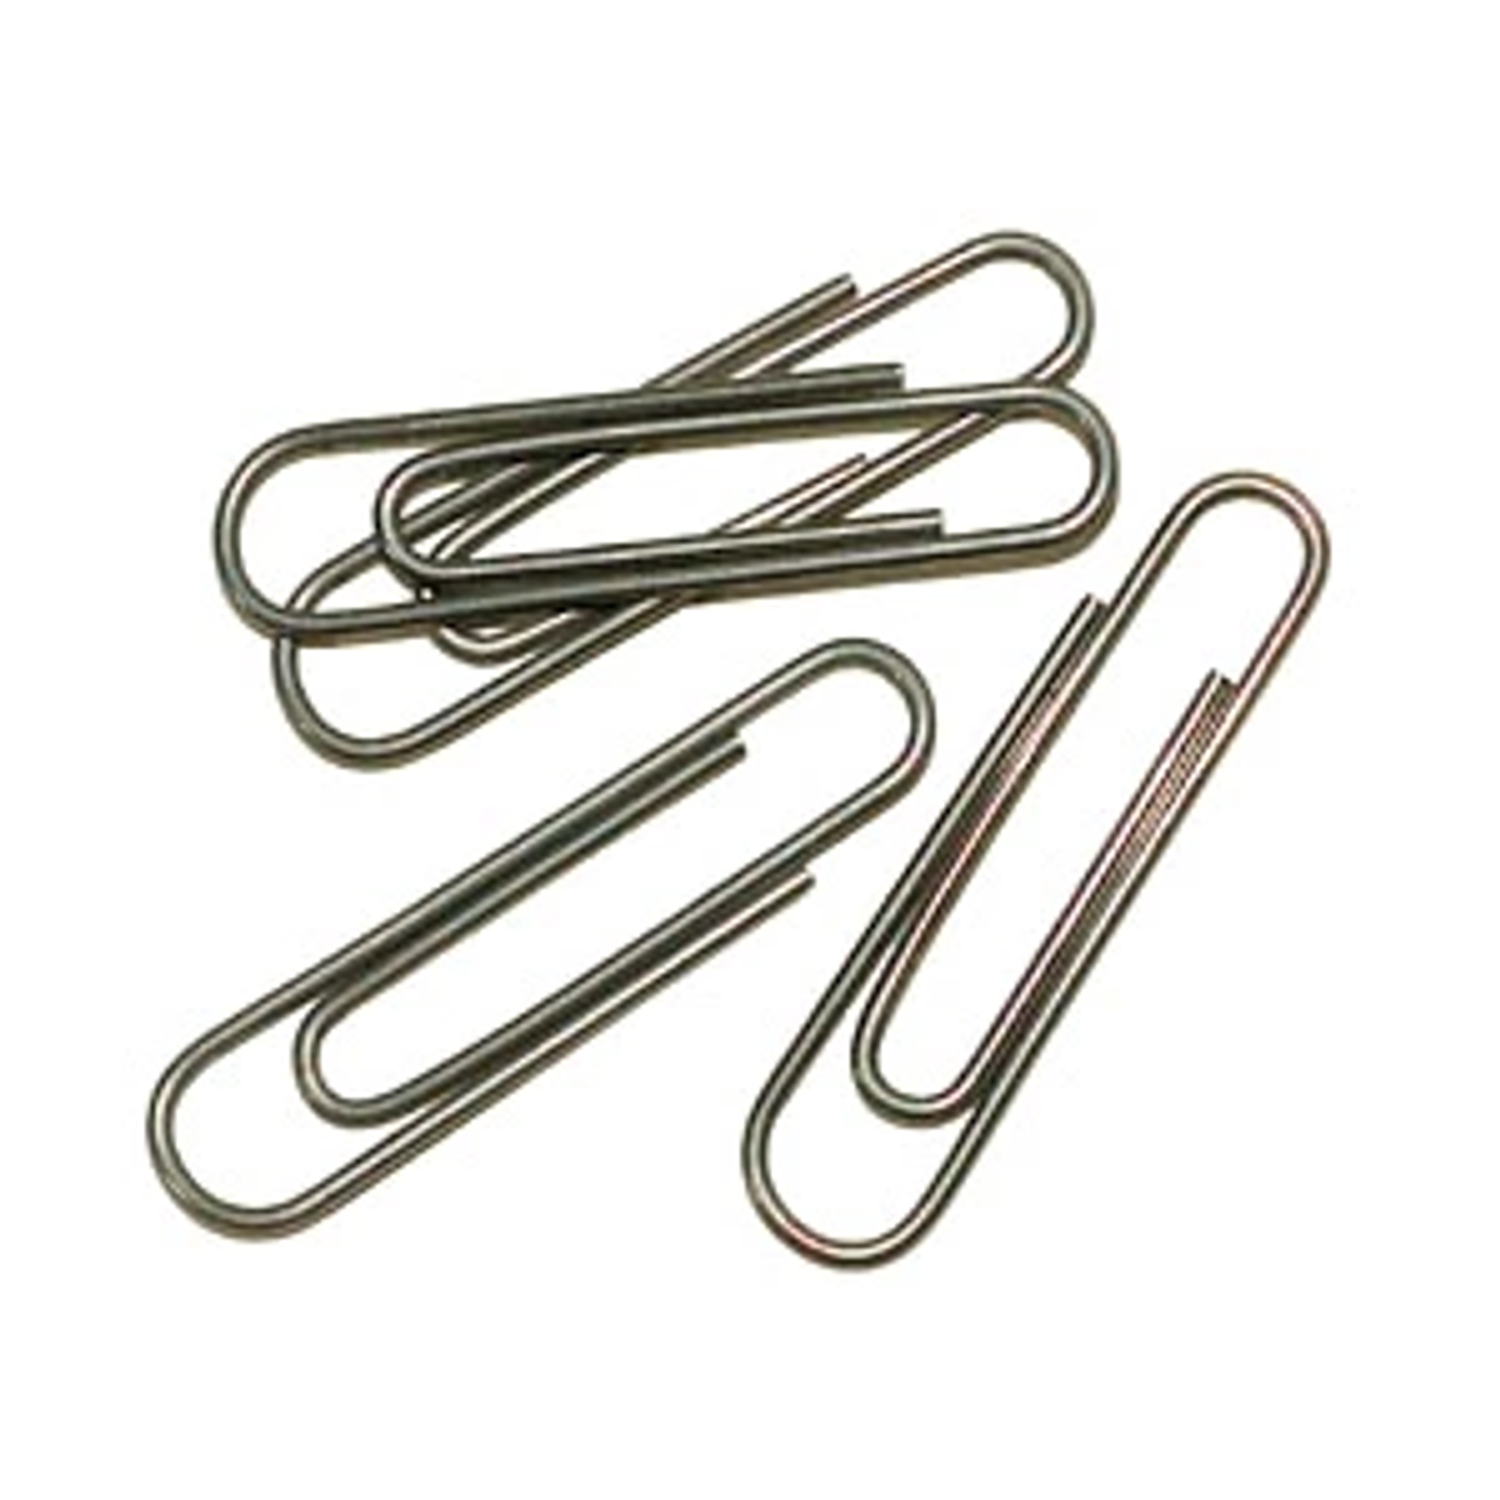 Stainless Steel Paper Clips (50-Pack), Fasteners, Conservation Supplies, Preservation